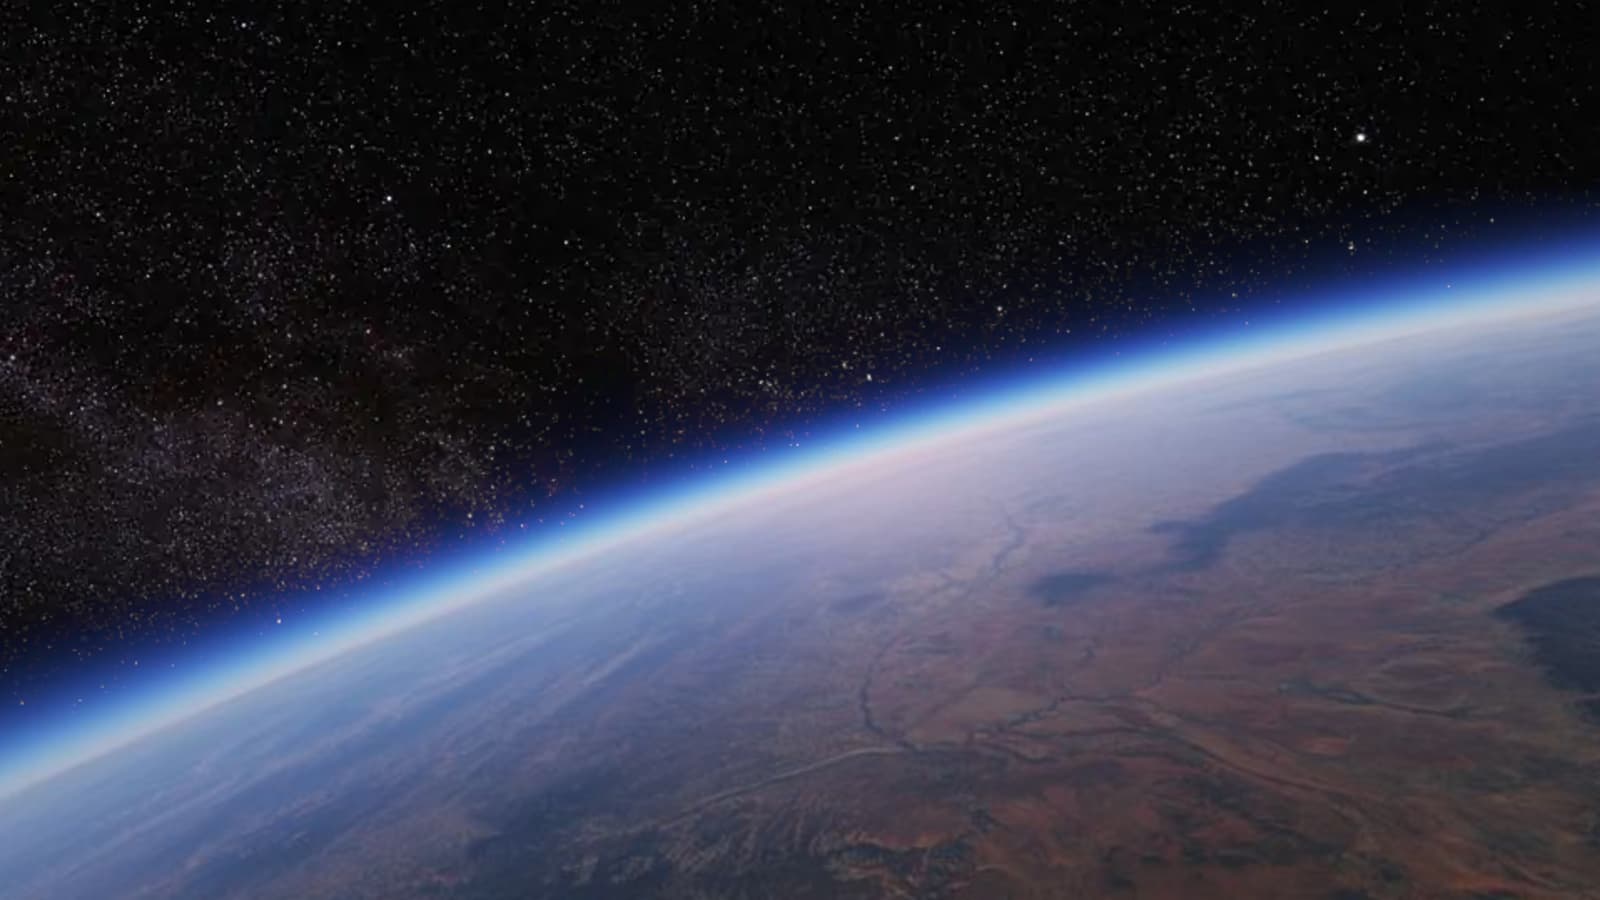 google earth timelapse shows changes to